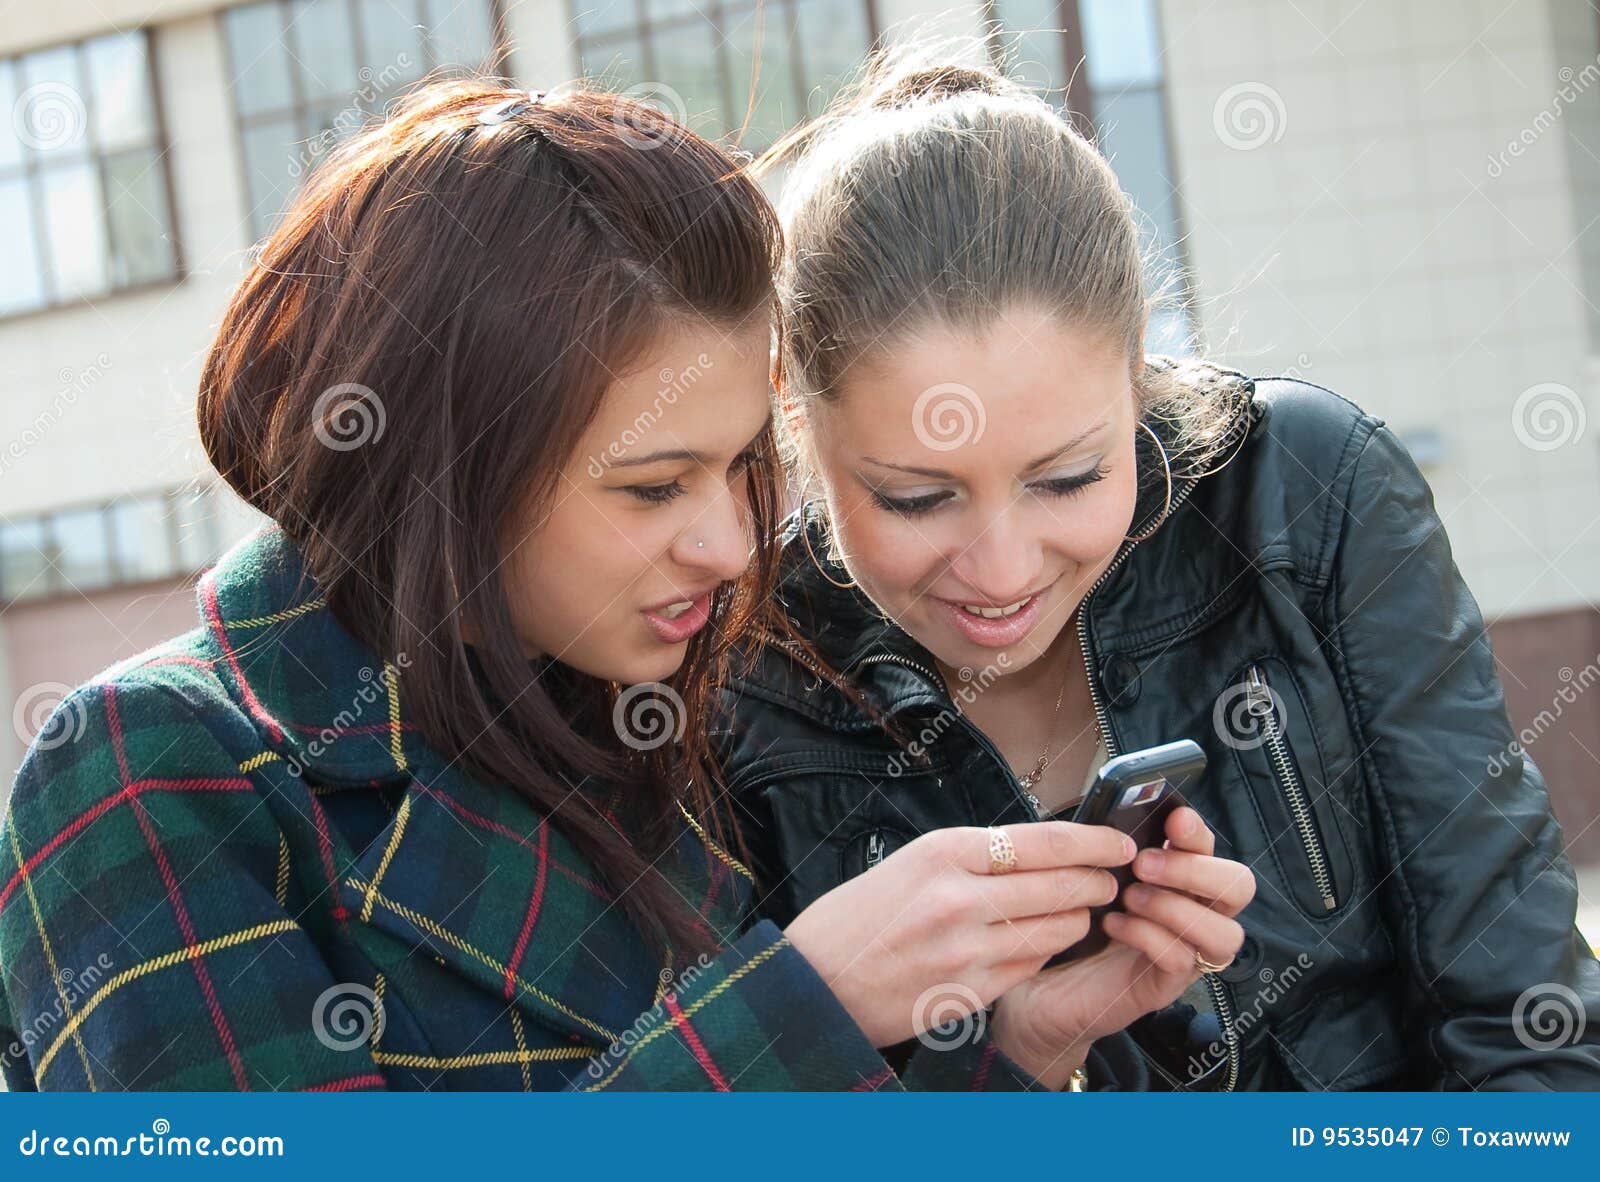 girls watching each other pics